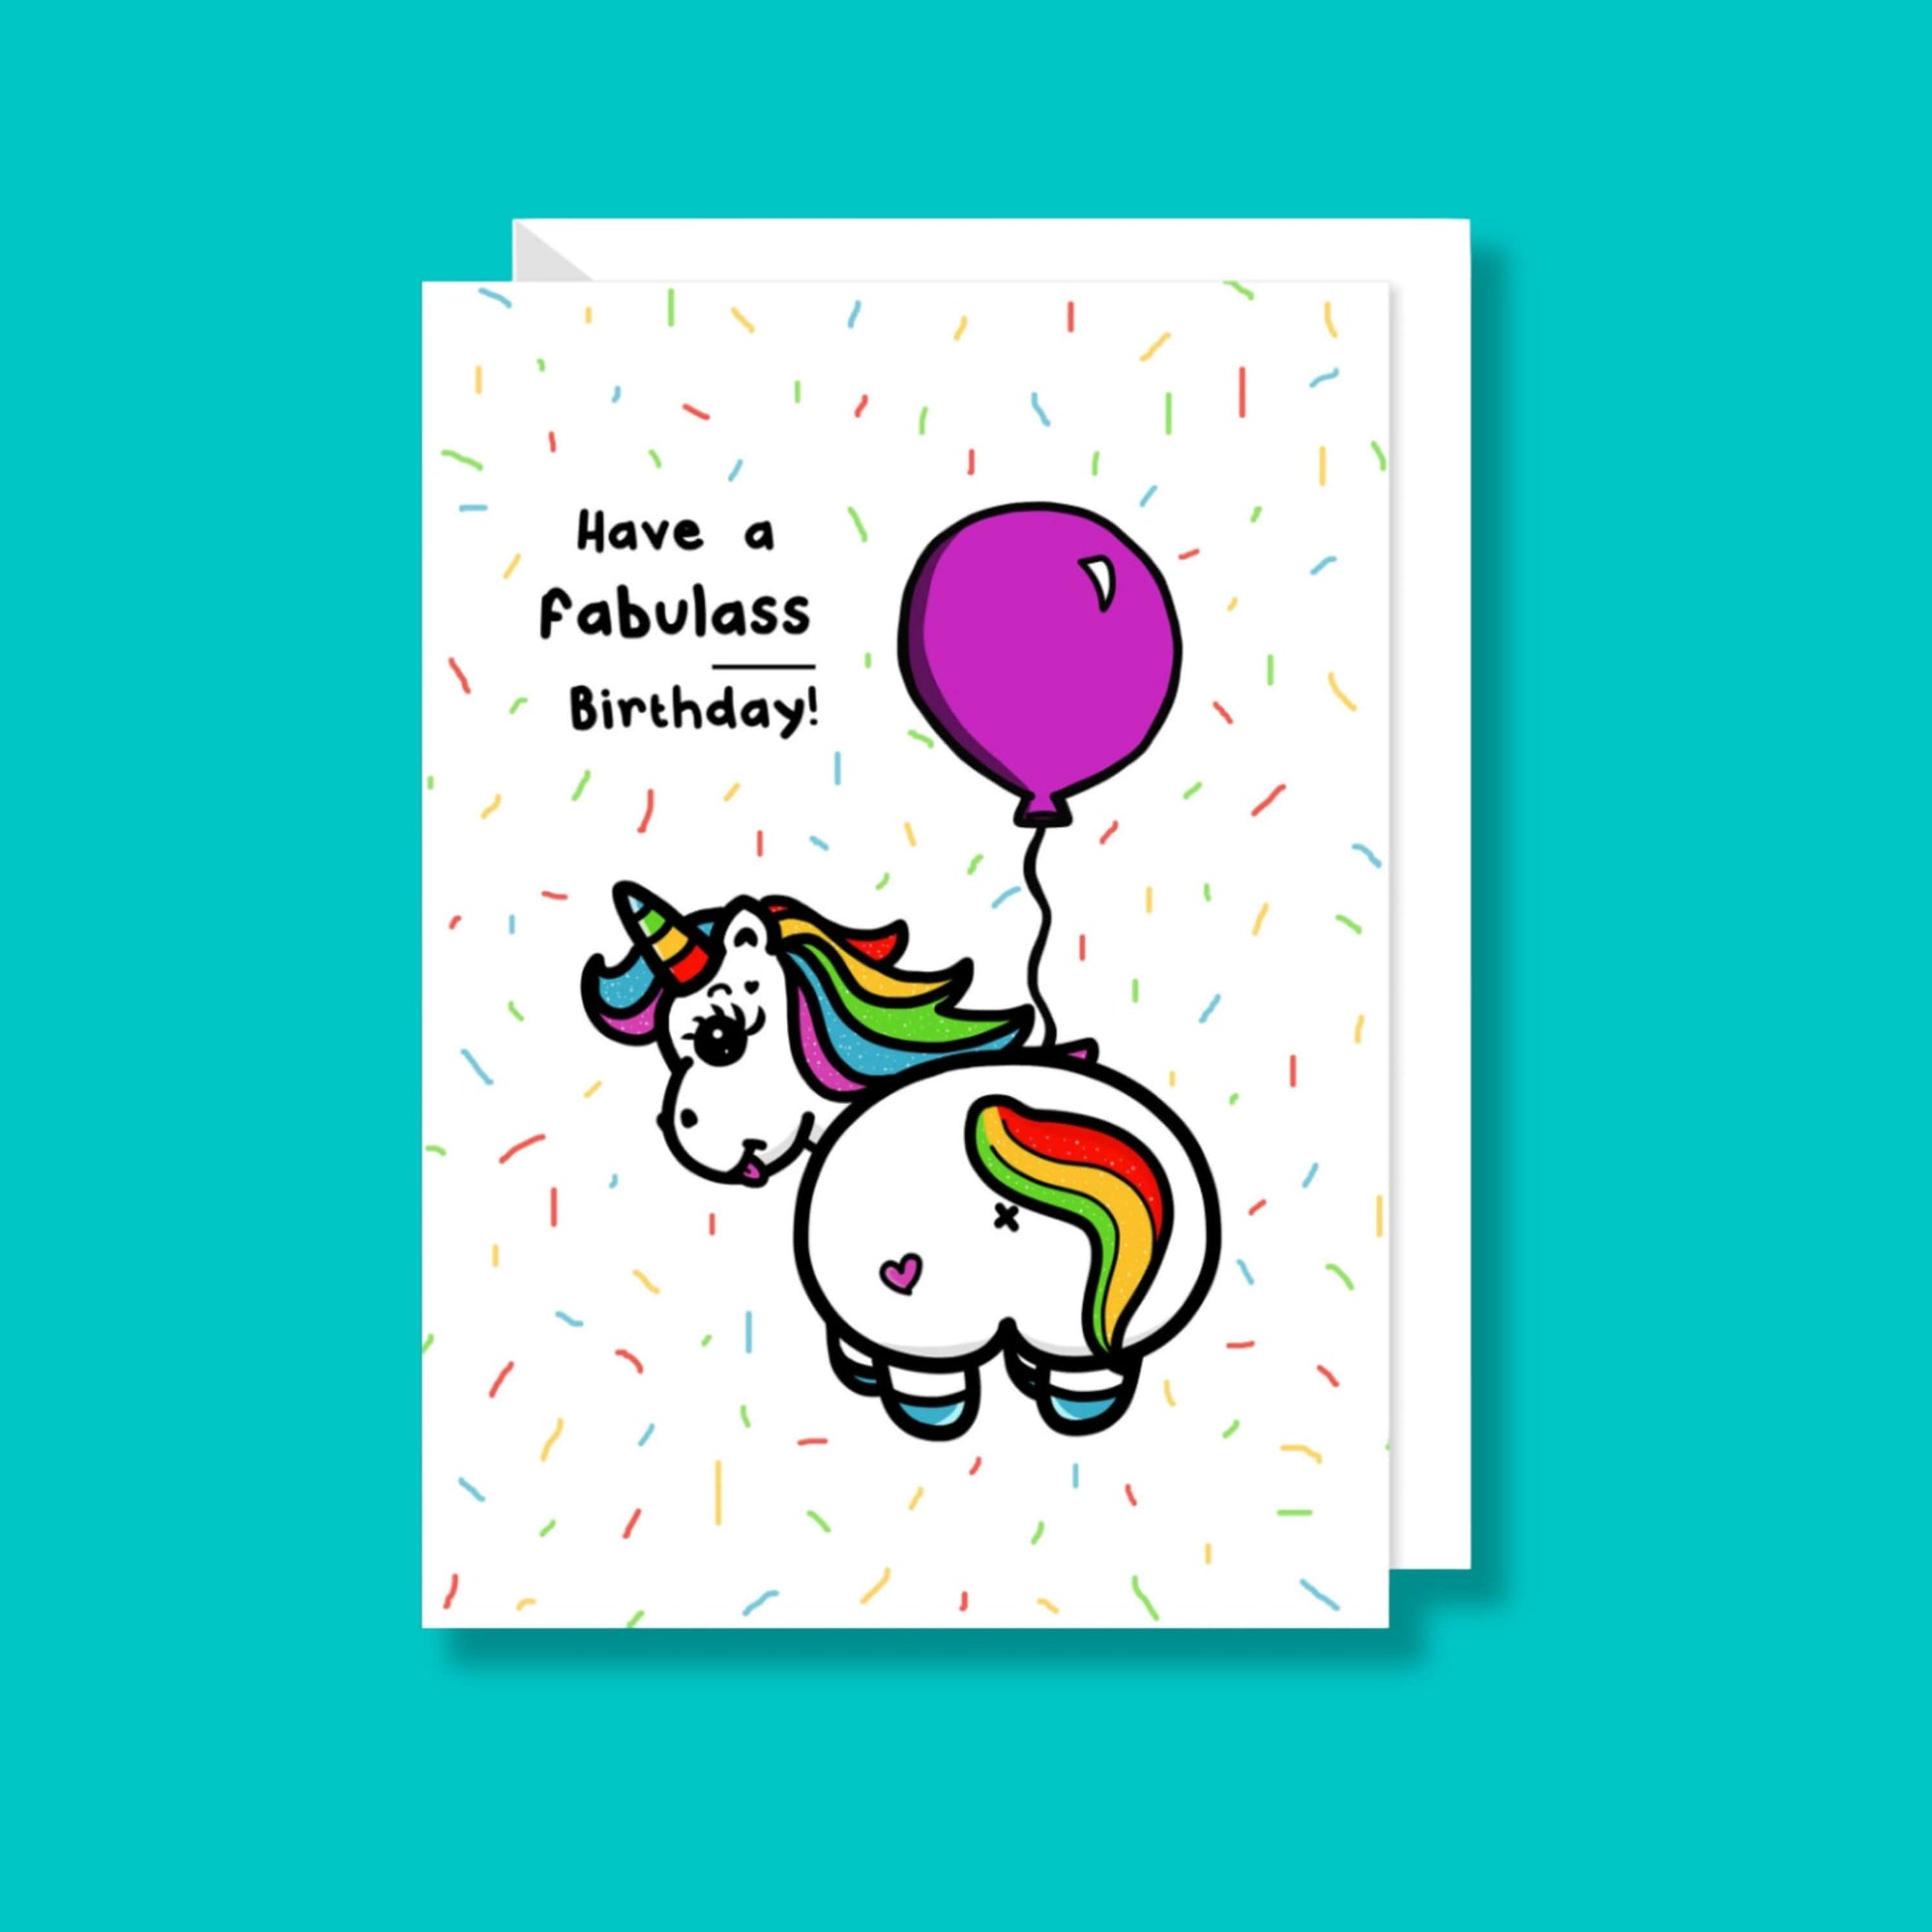 a white greeting card with an illustration of a unicorn with it's bum to the camera and looking back over it's shoulder with it's tongue out. The unicorn has rainbow coloured hair and horn and a pink love heart on it's bum and is holding a pink balloon. There is rainbow confetti all over the card and 'Have a fabulass Birthday!' is written in black with 'ass' underlined. The sassy birthday card is on a blue background with a white envelope underneath.